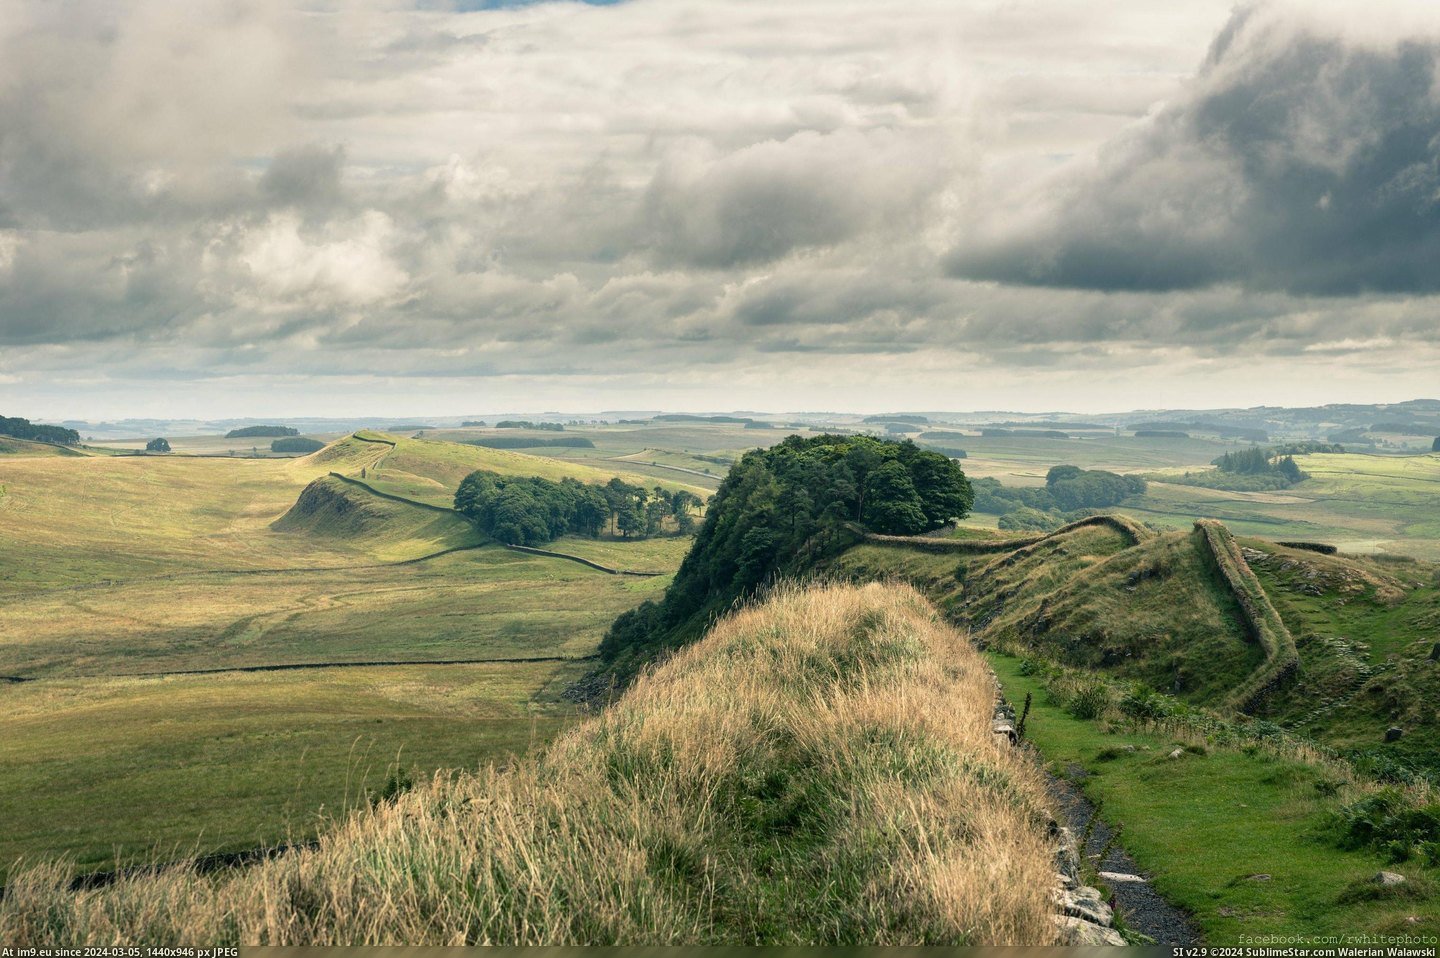 #Show #Wall #Allowed #Impossible #Hadrian #Landscape #Stunning [Earthporn] I don't know if this will be allowed here, but it's impossible to show the stunning landscape around Hadrian's Wall  Pic. (Bild von album My r/EARTHPORN favs))